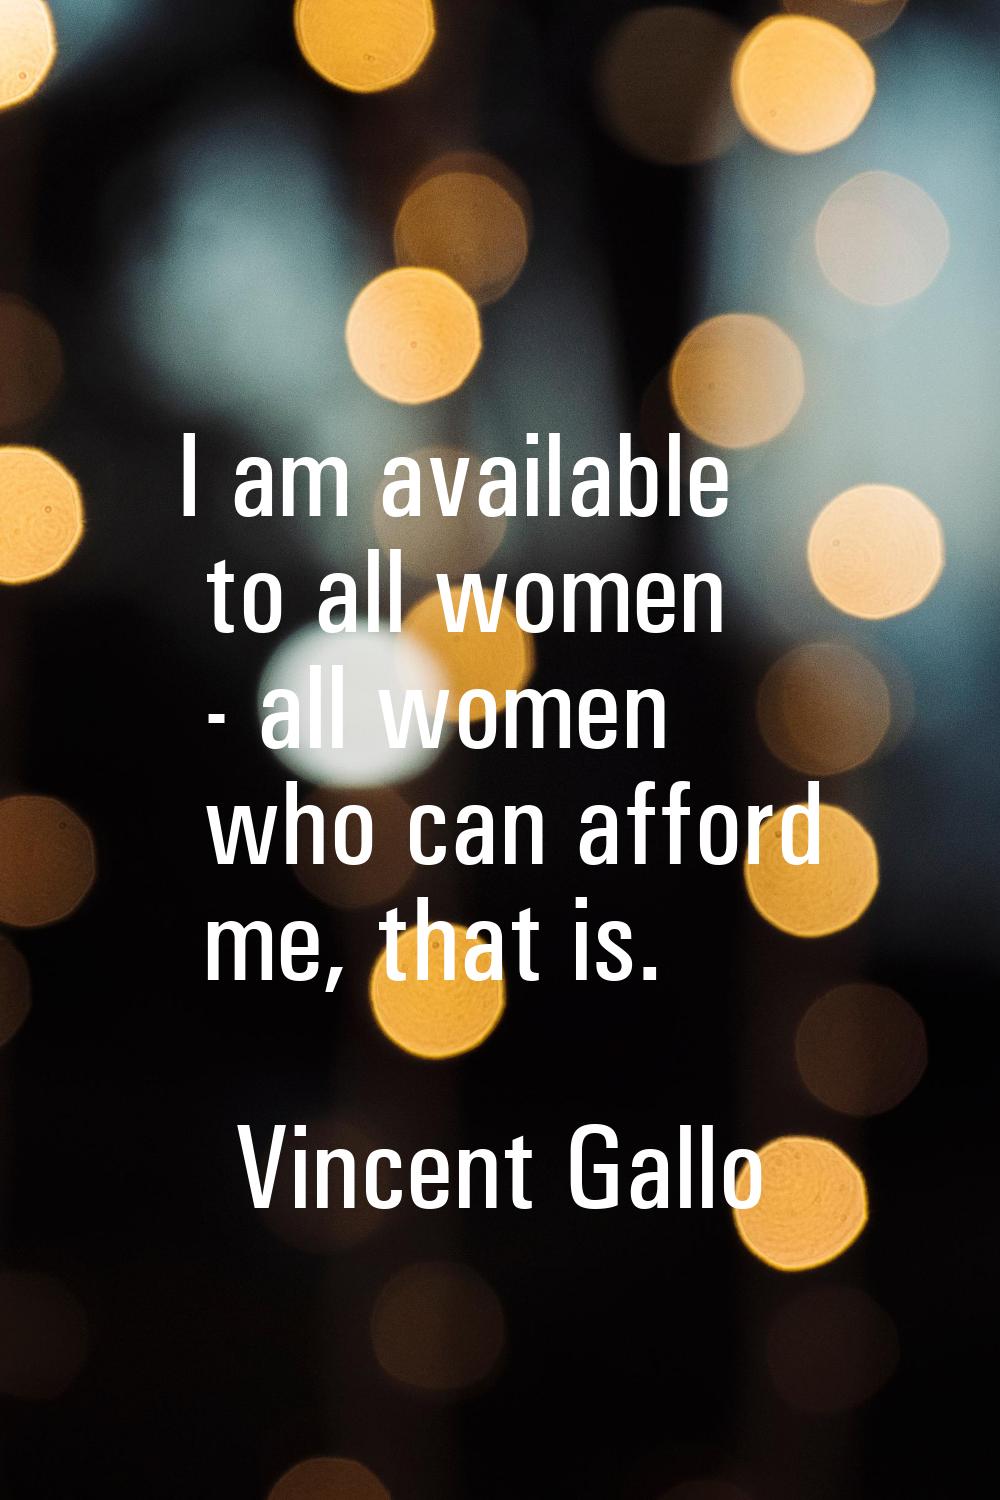 I am available to all women - all women who can afford me, that is.